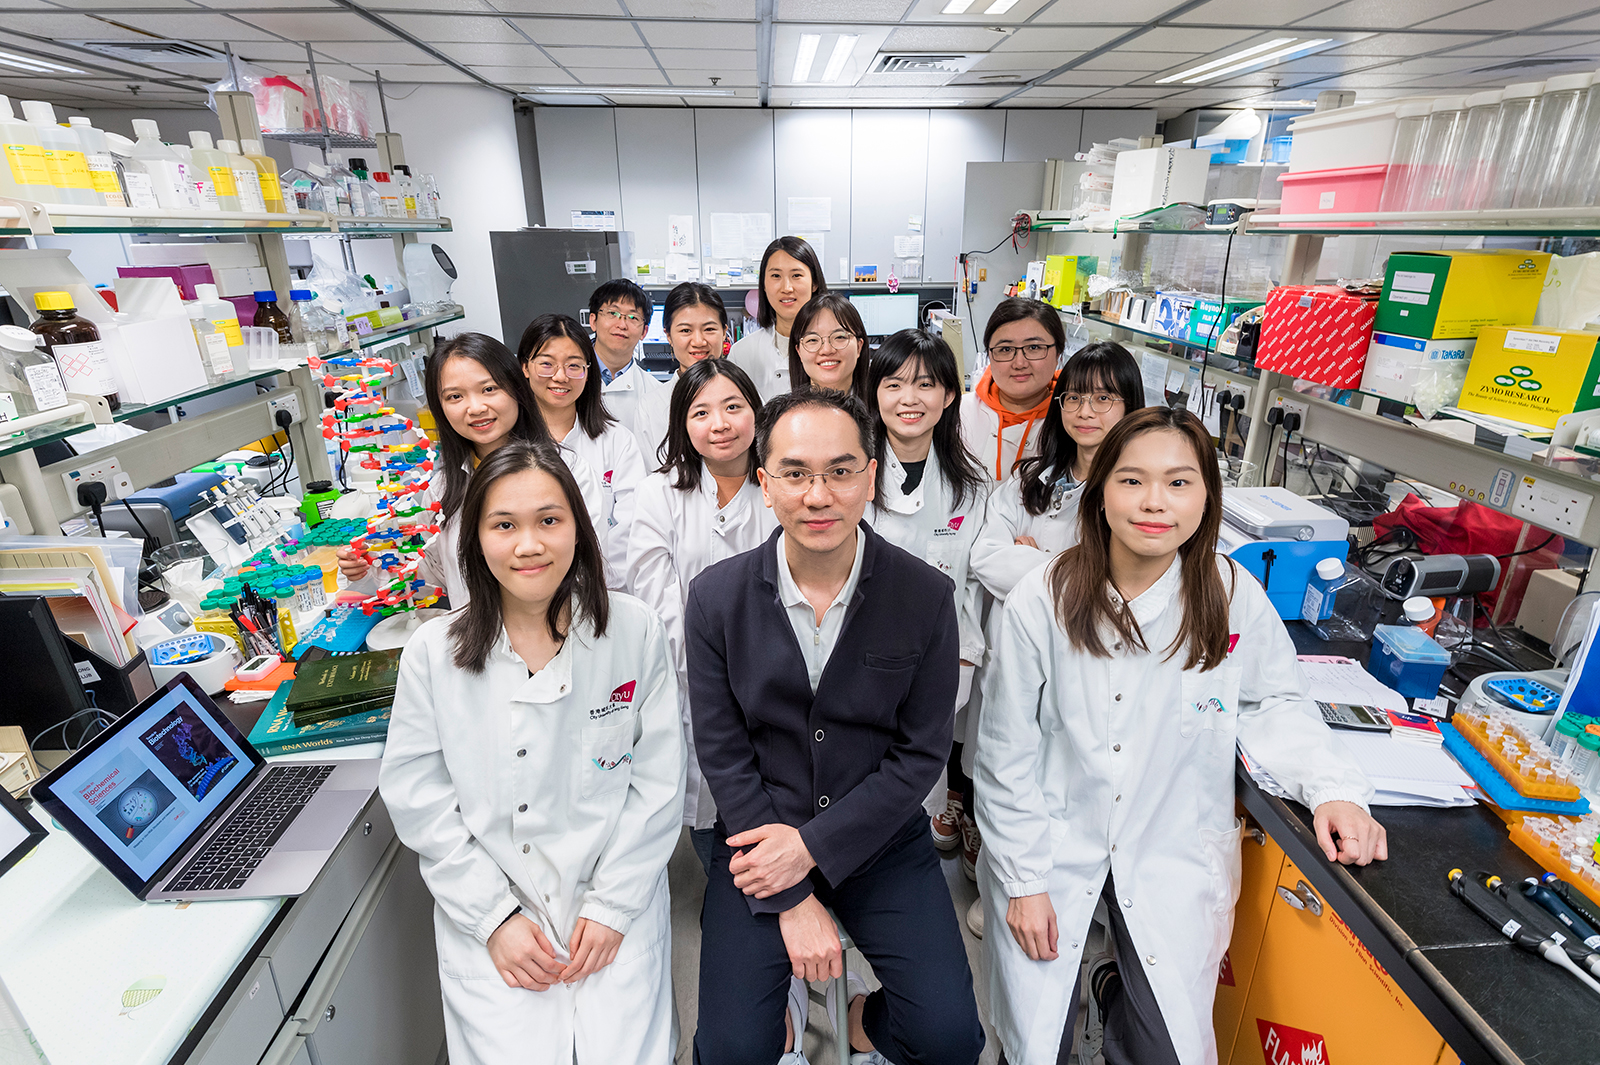 Professor Kwok and his research team